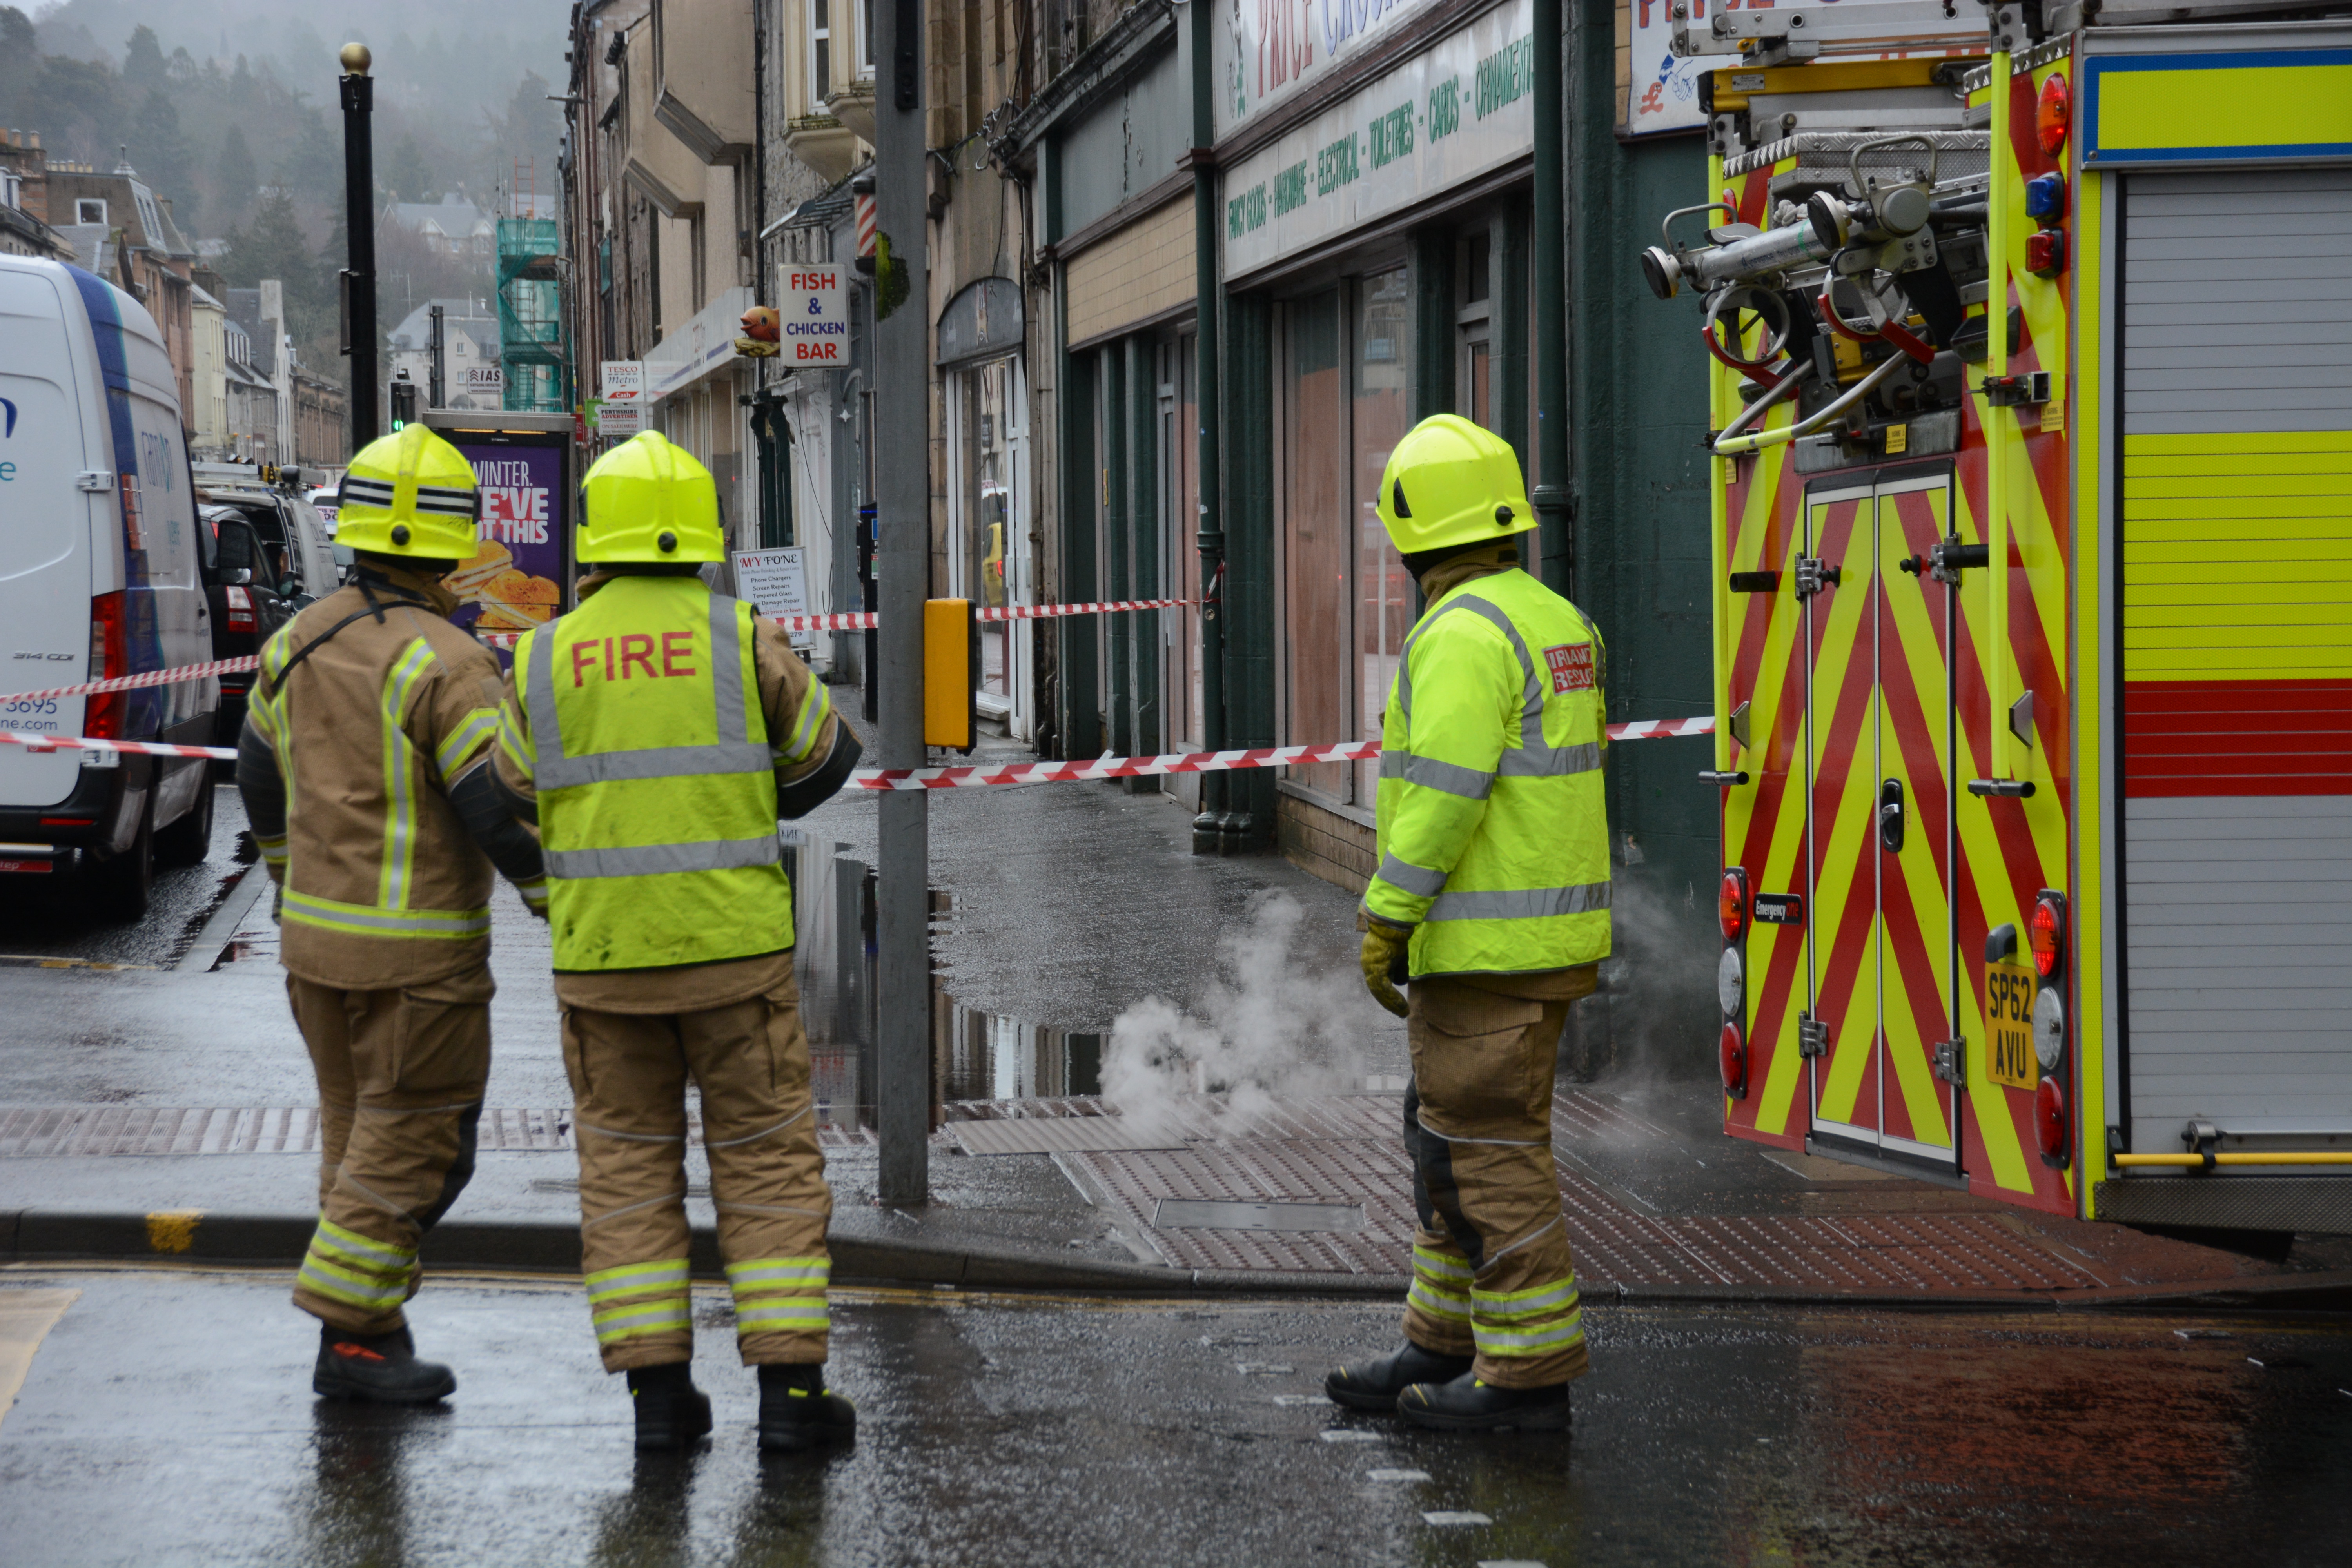 Crews attended the "underground fire" in Perth.